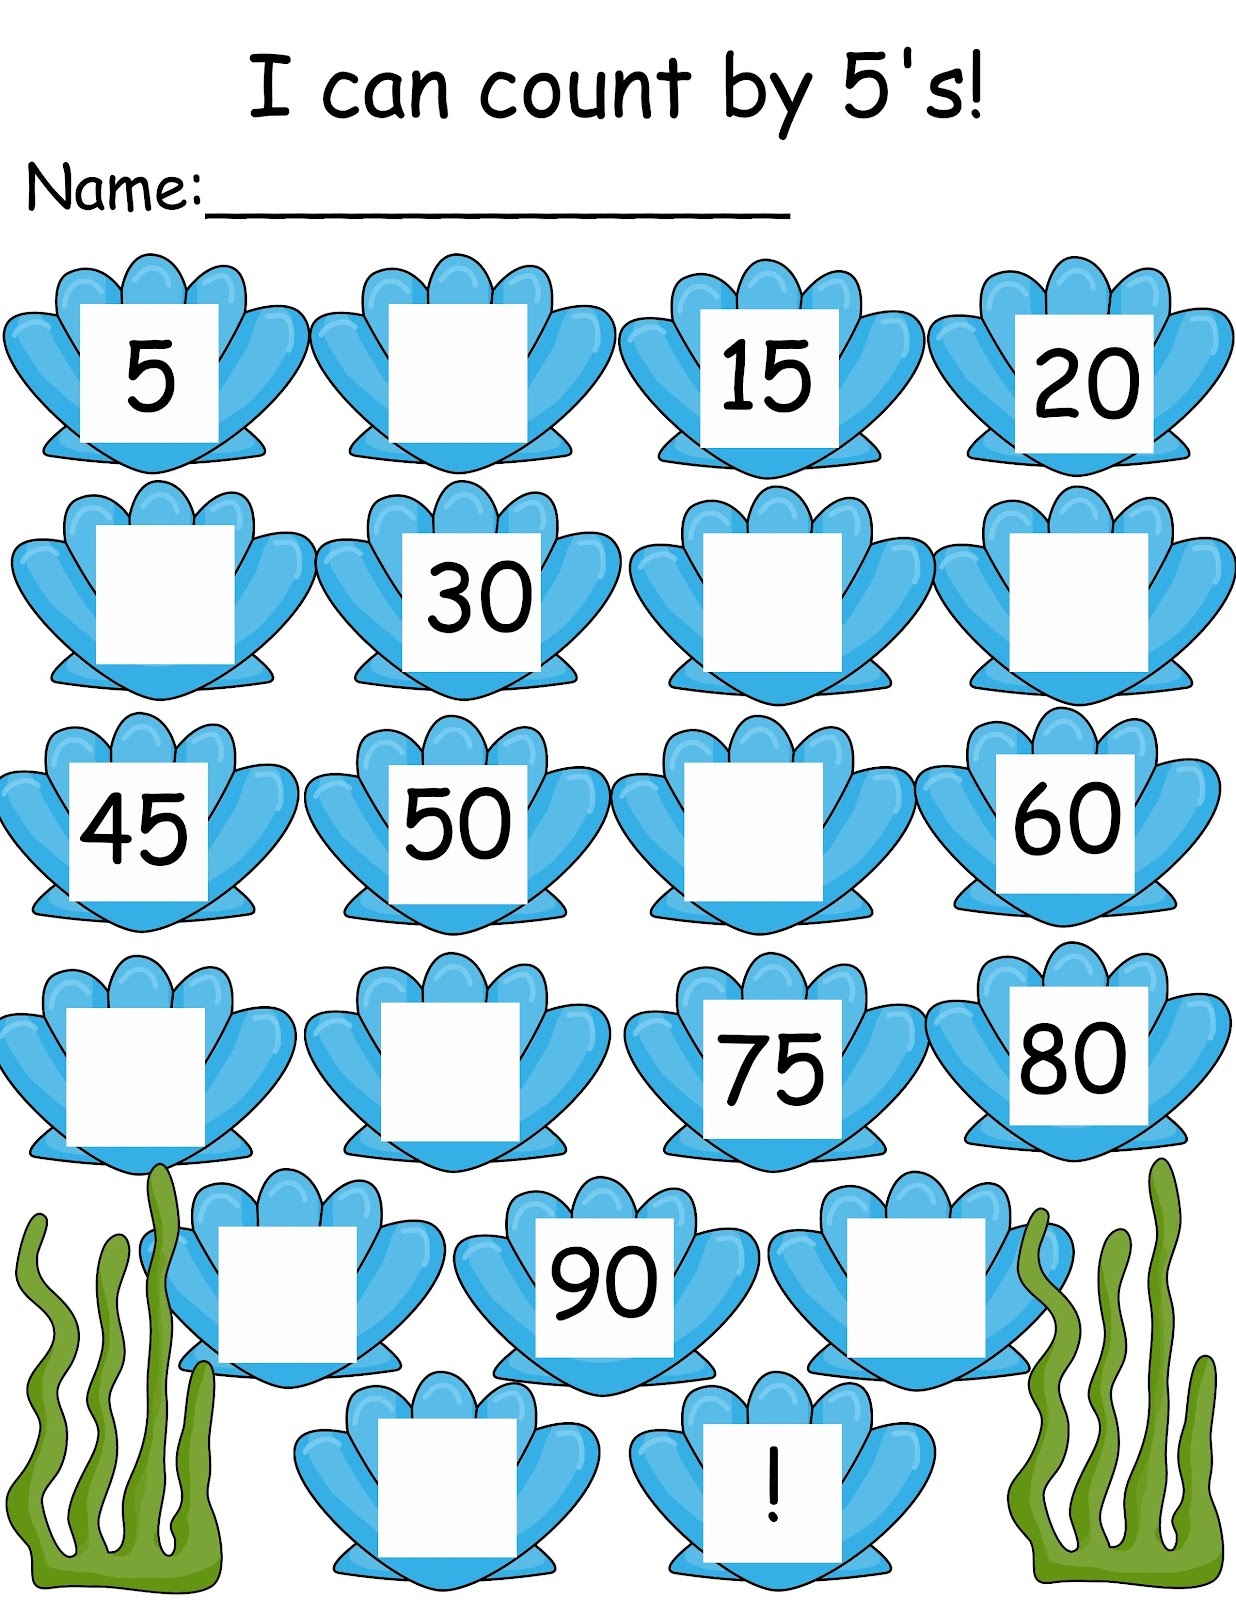 Count by 11 Worksheets to Print  Activity Shelter Regarding Counting By 5s Worksheet